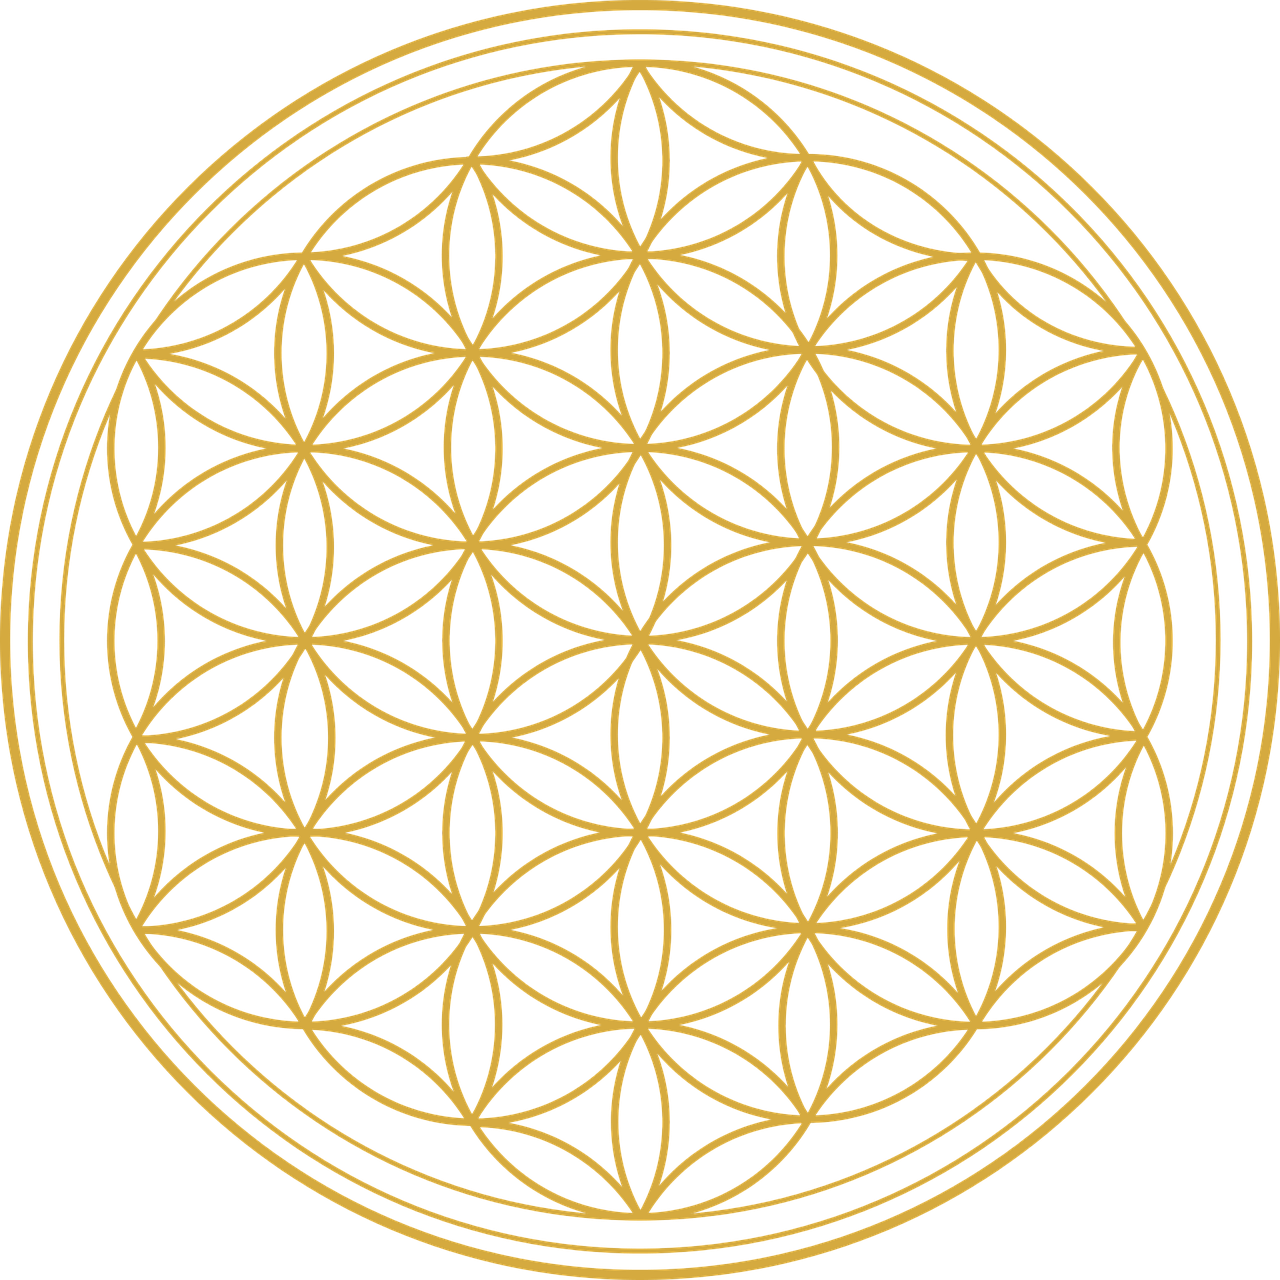 The Flower Of Life Junction Point